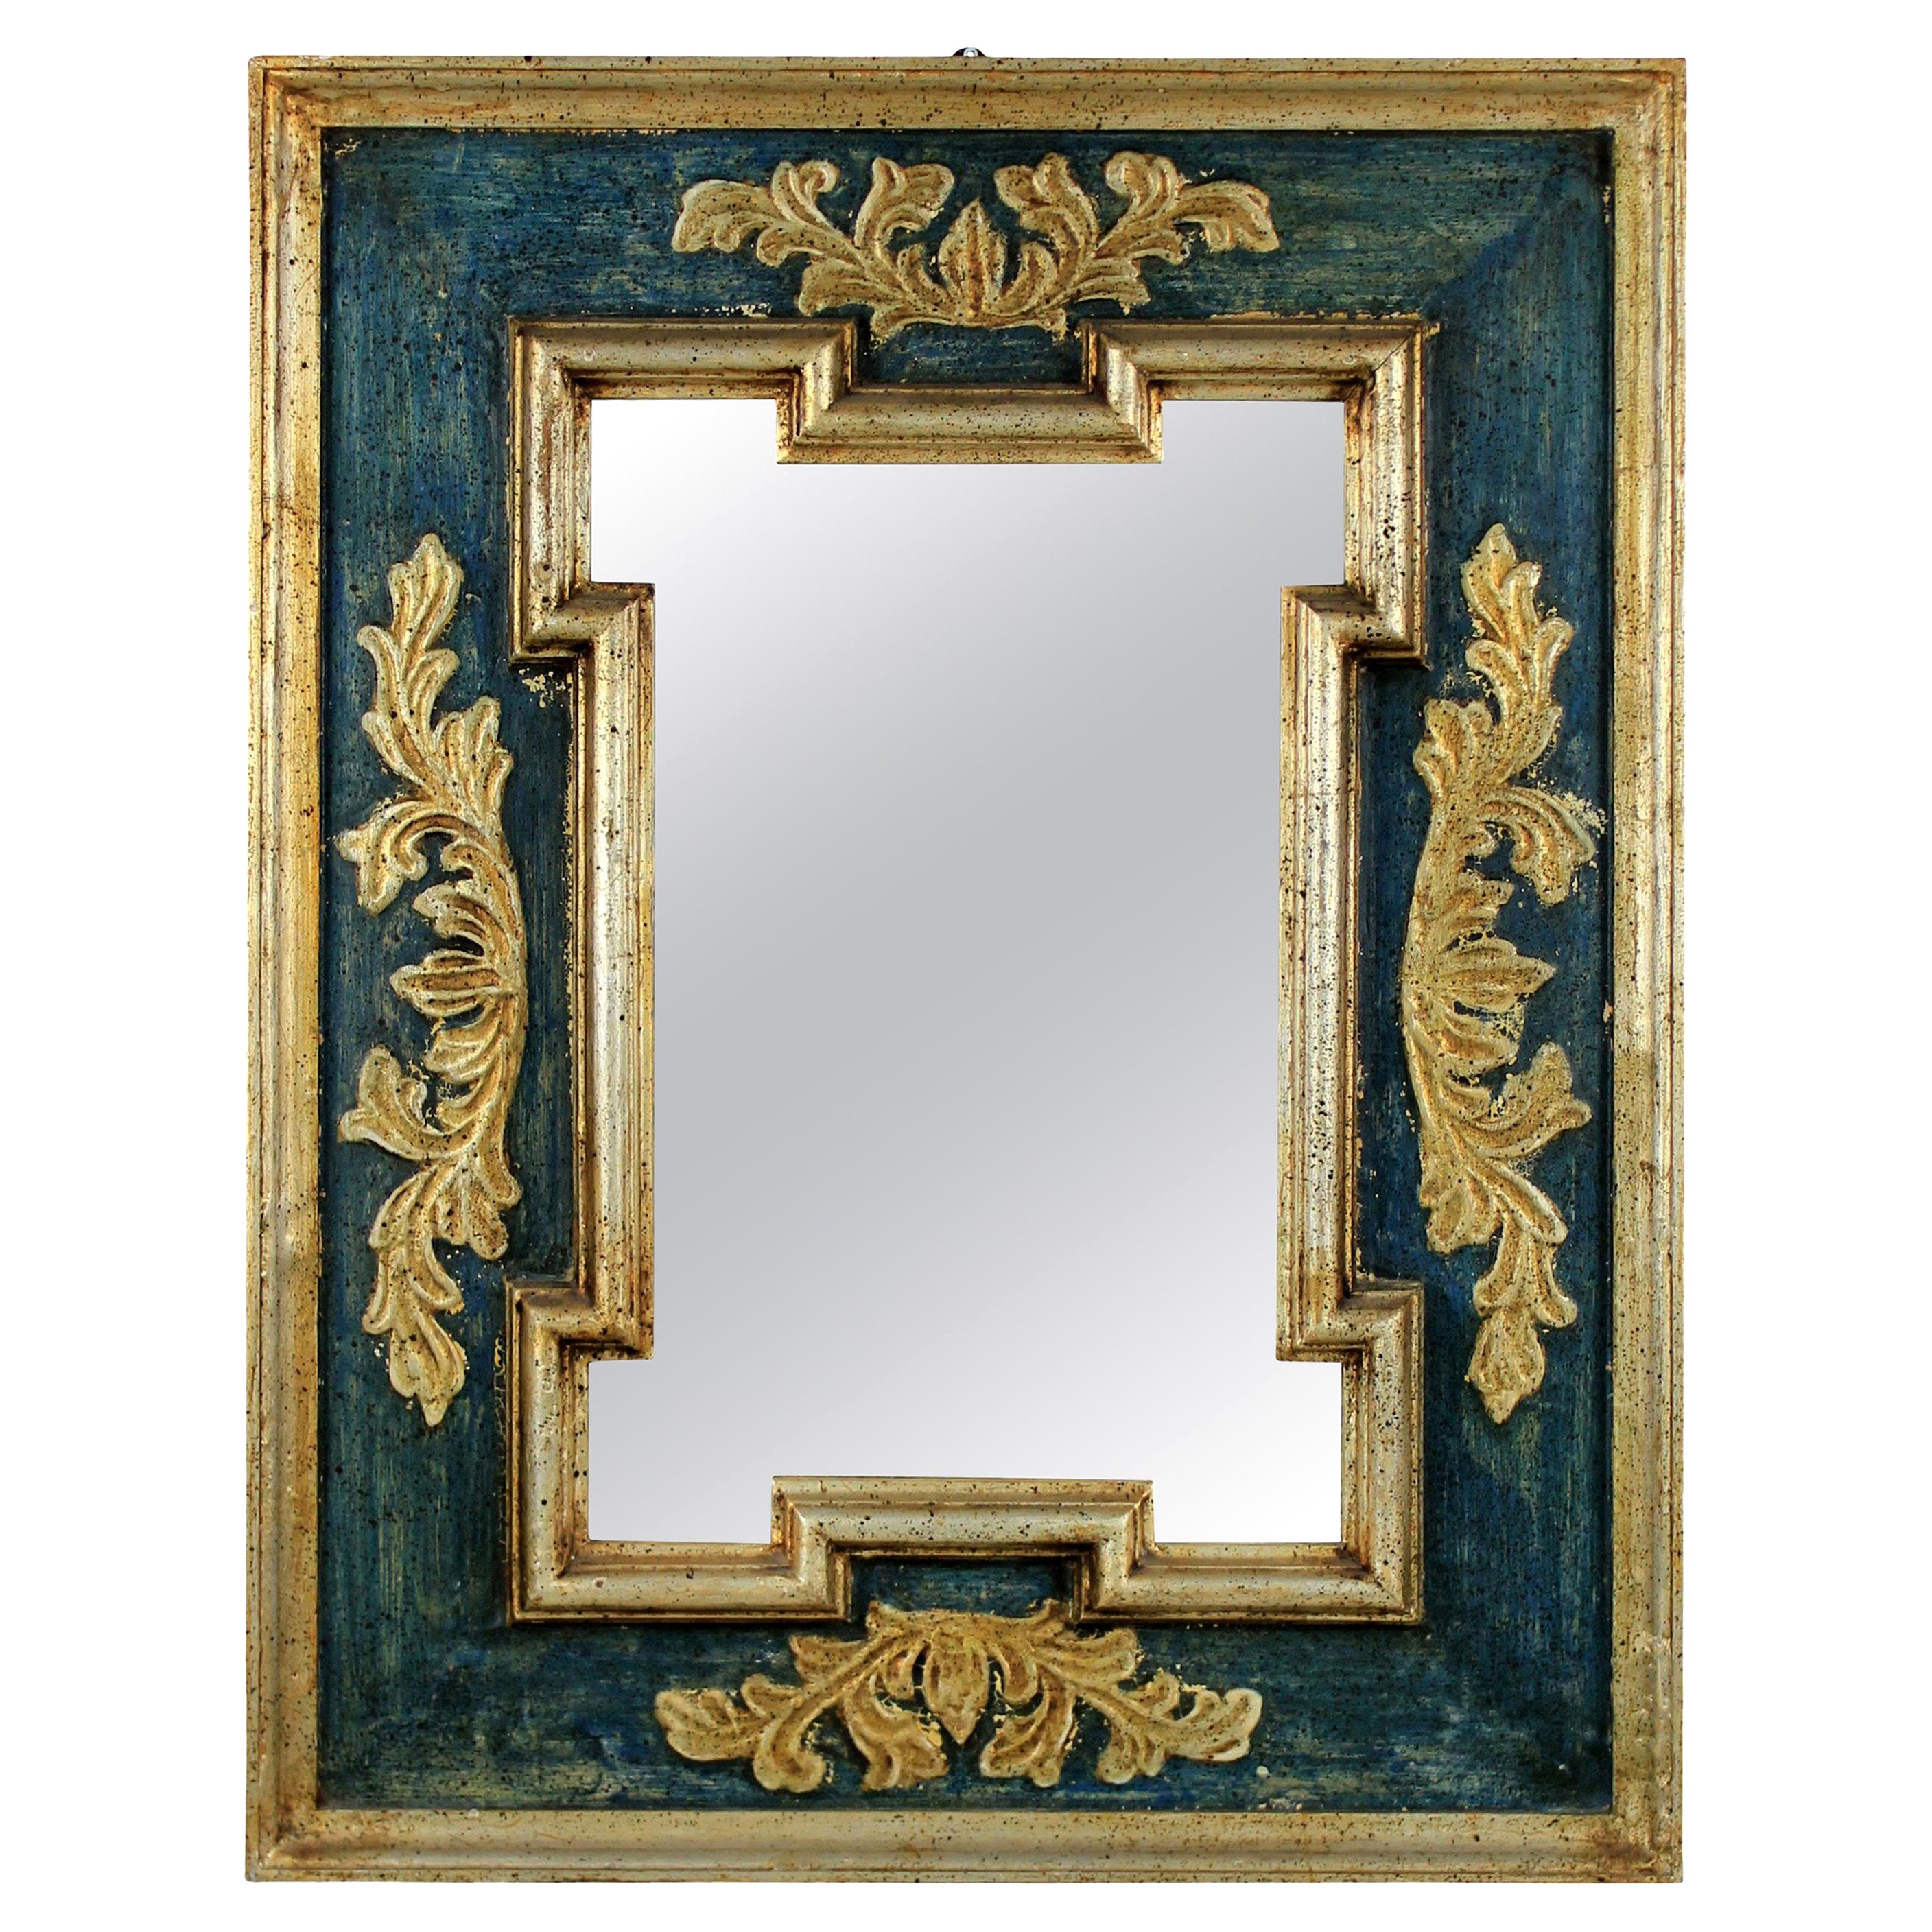 Midcentury Florentine Painted and Gilded Mirror